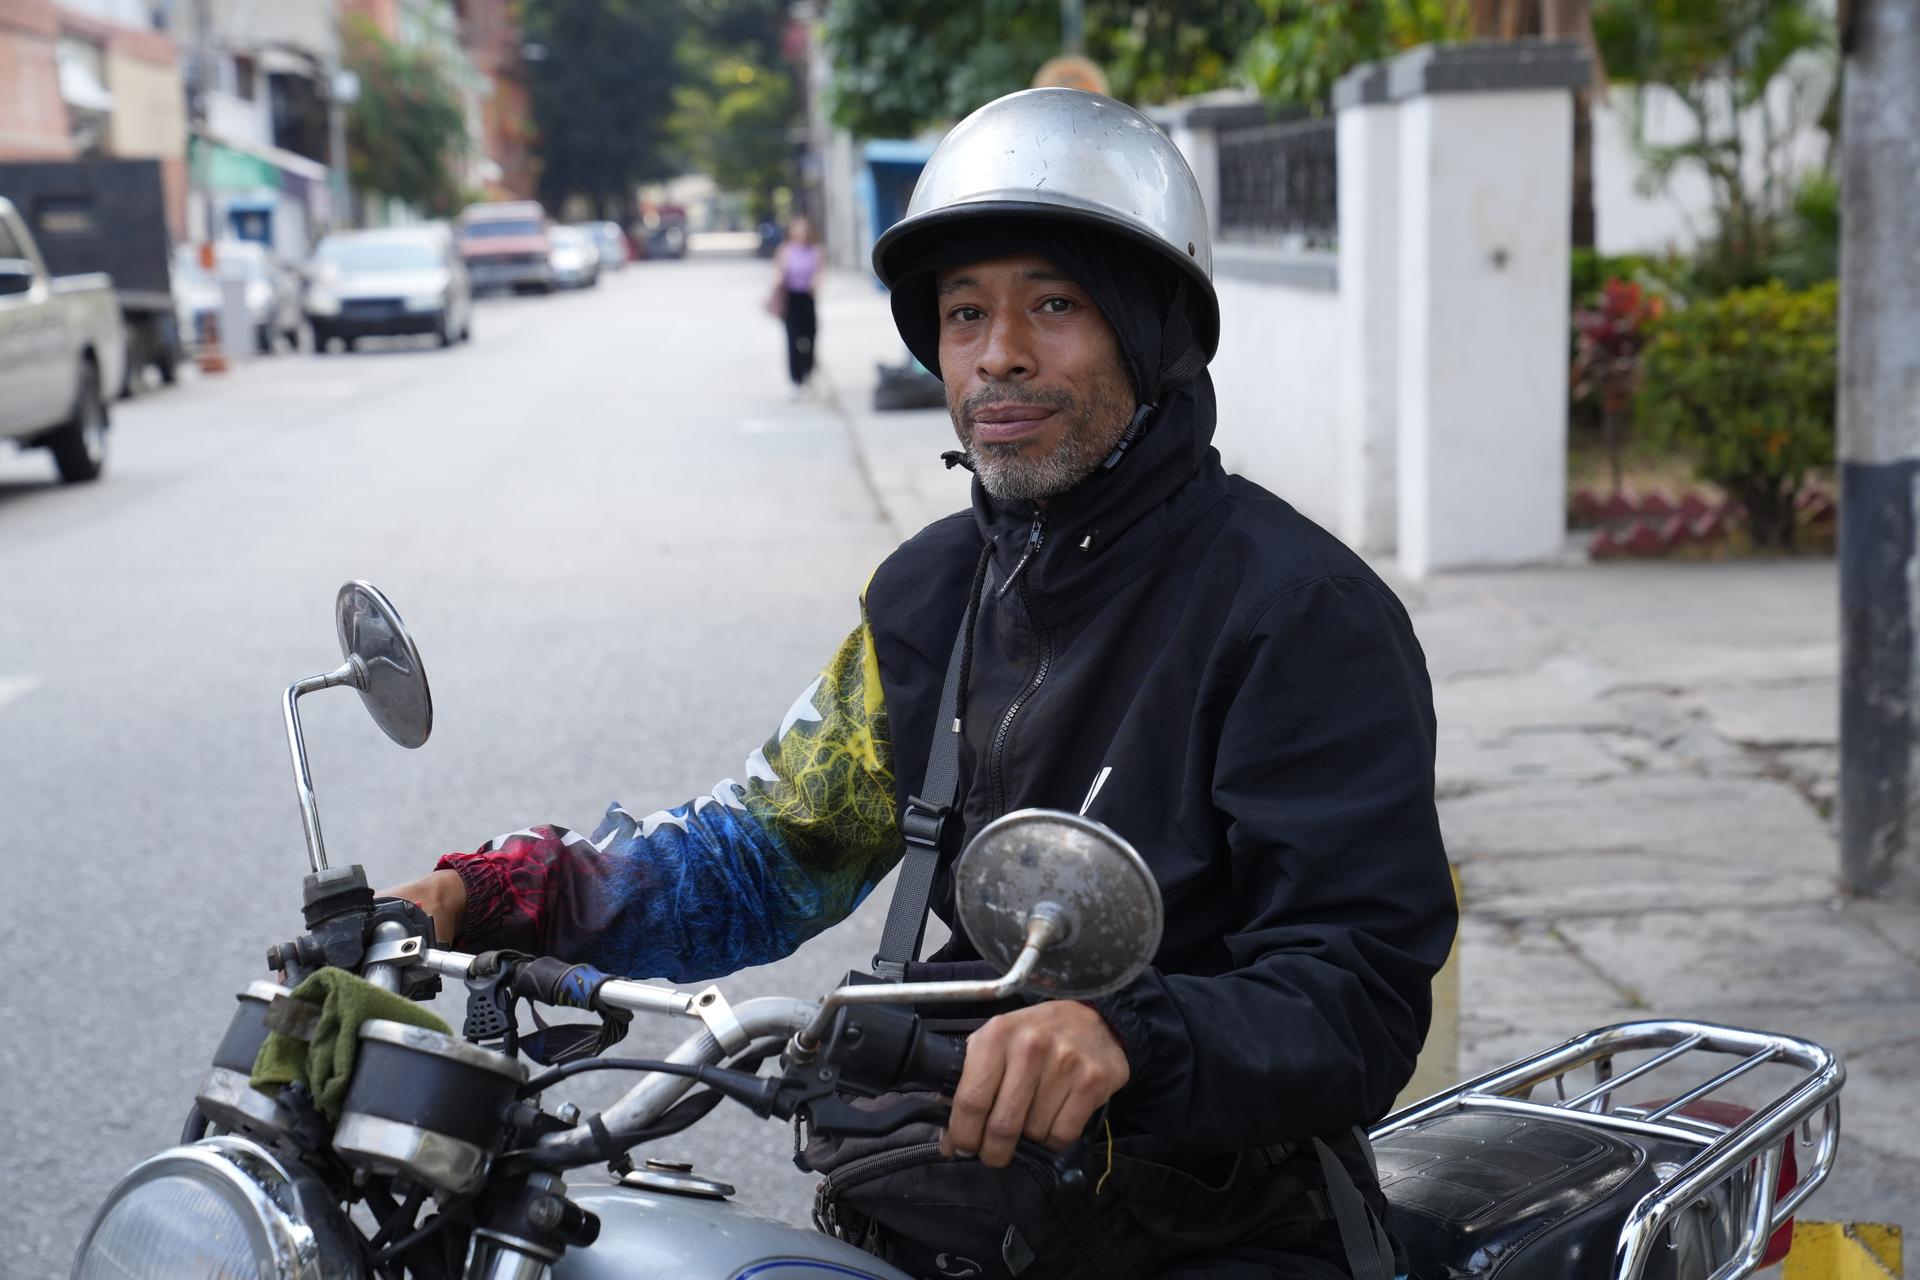 When he's not with his students, P.E. teacher Yasser Sierra uses his old bike to transport people and make deliveries.